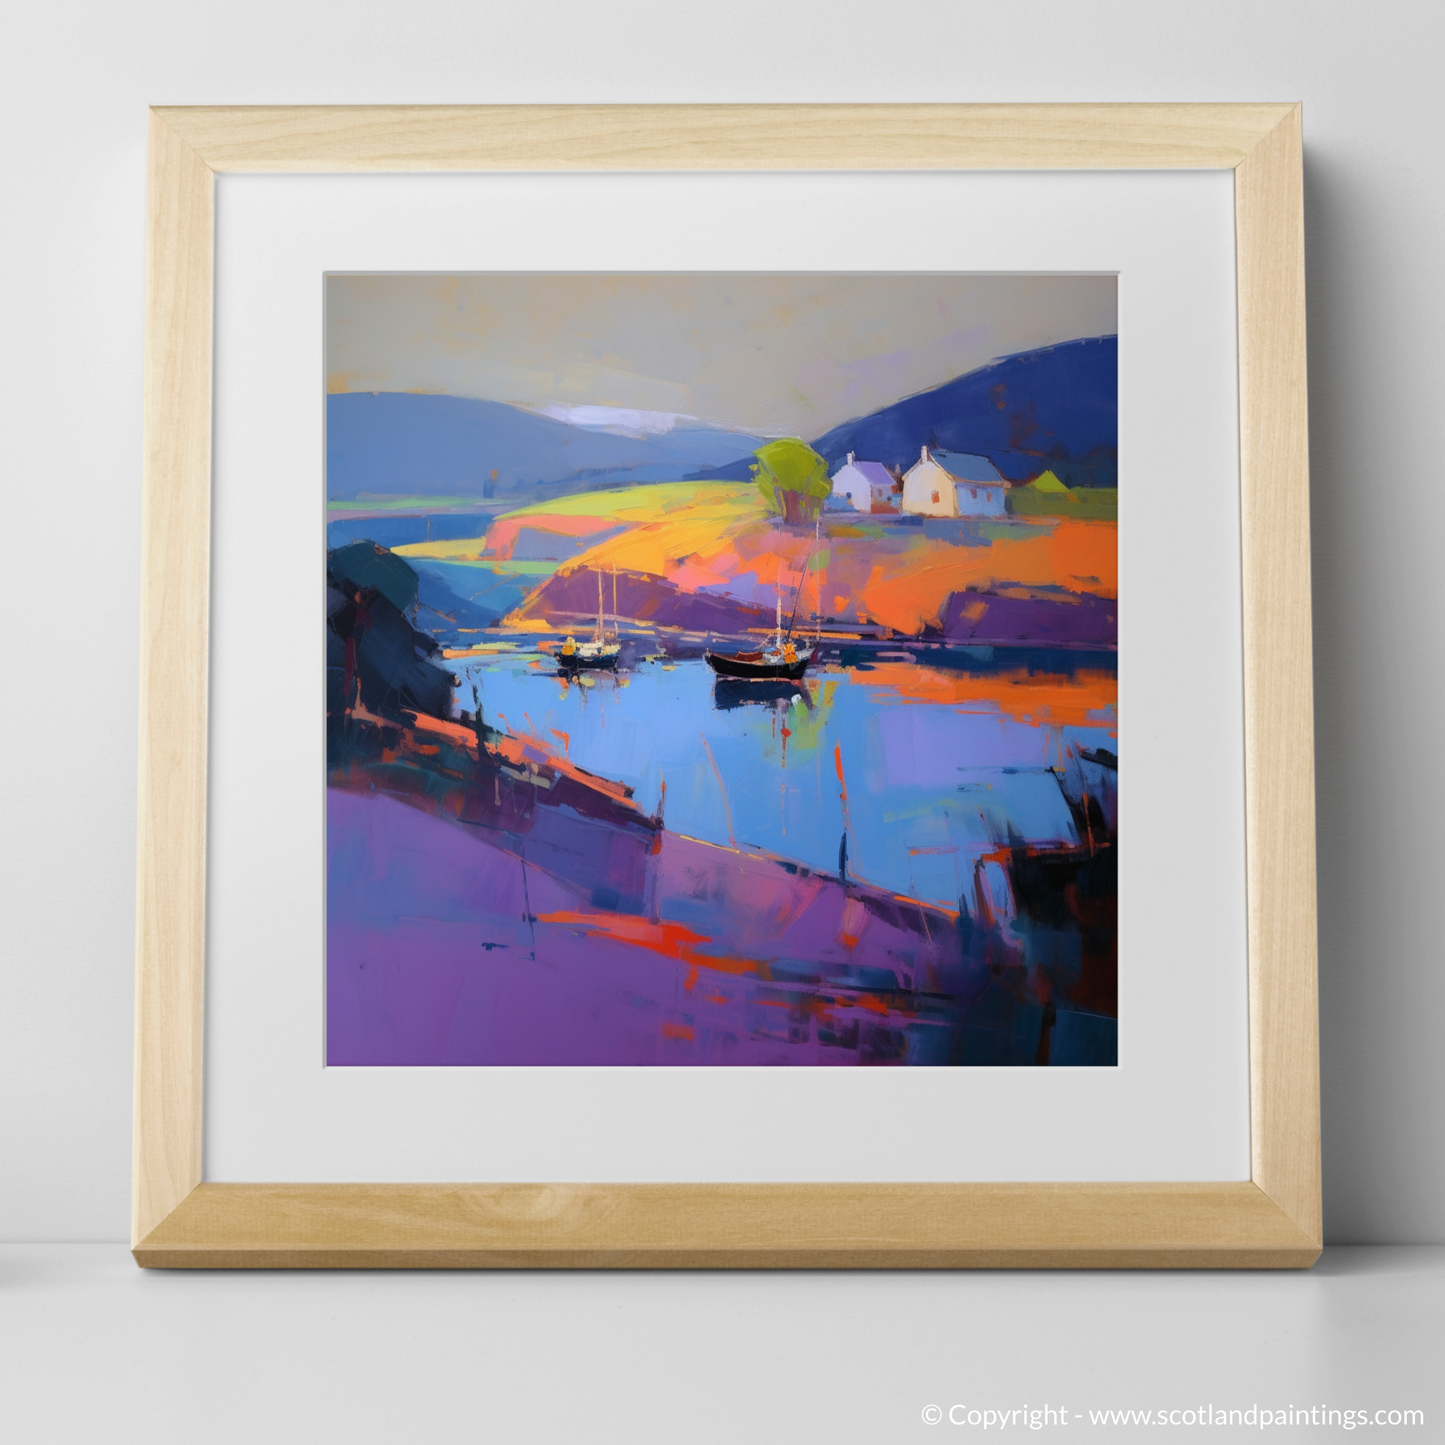 Dusk over Findochty Harbour: An Expressionist Ode to Scottish Tranquility